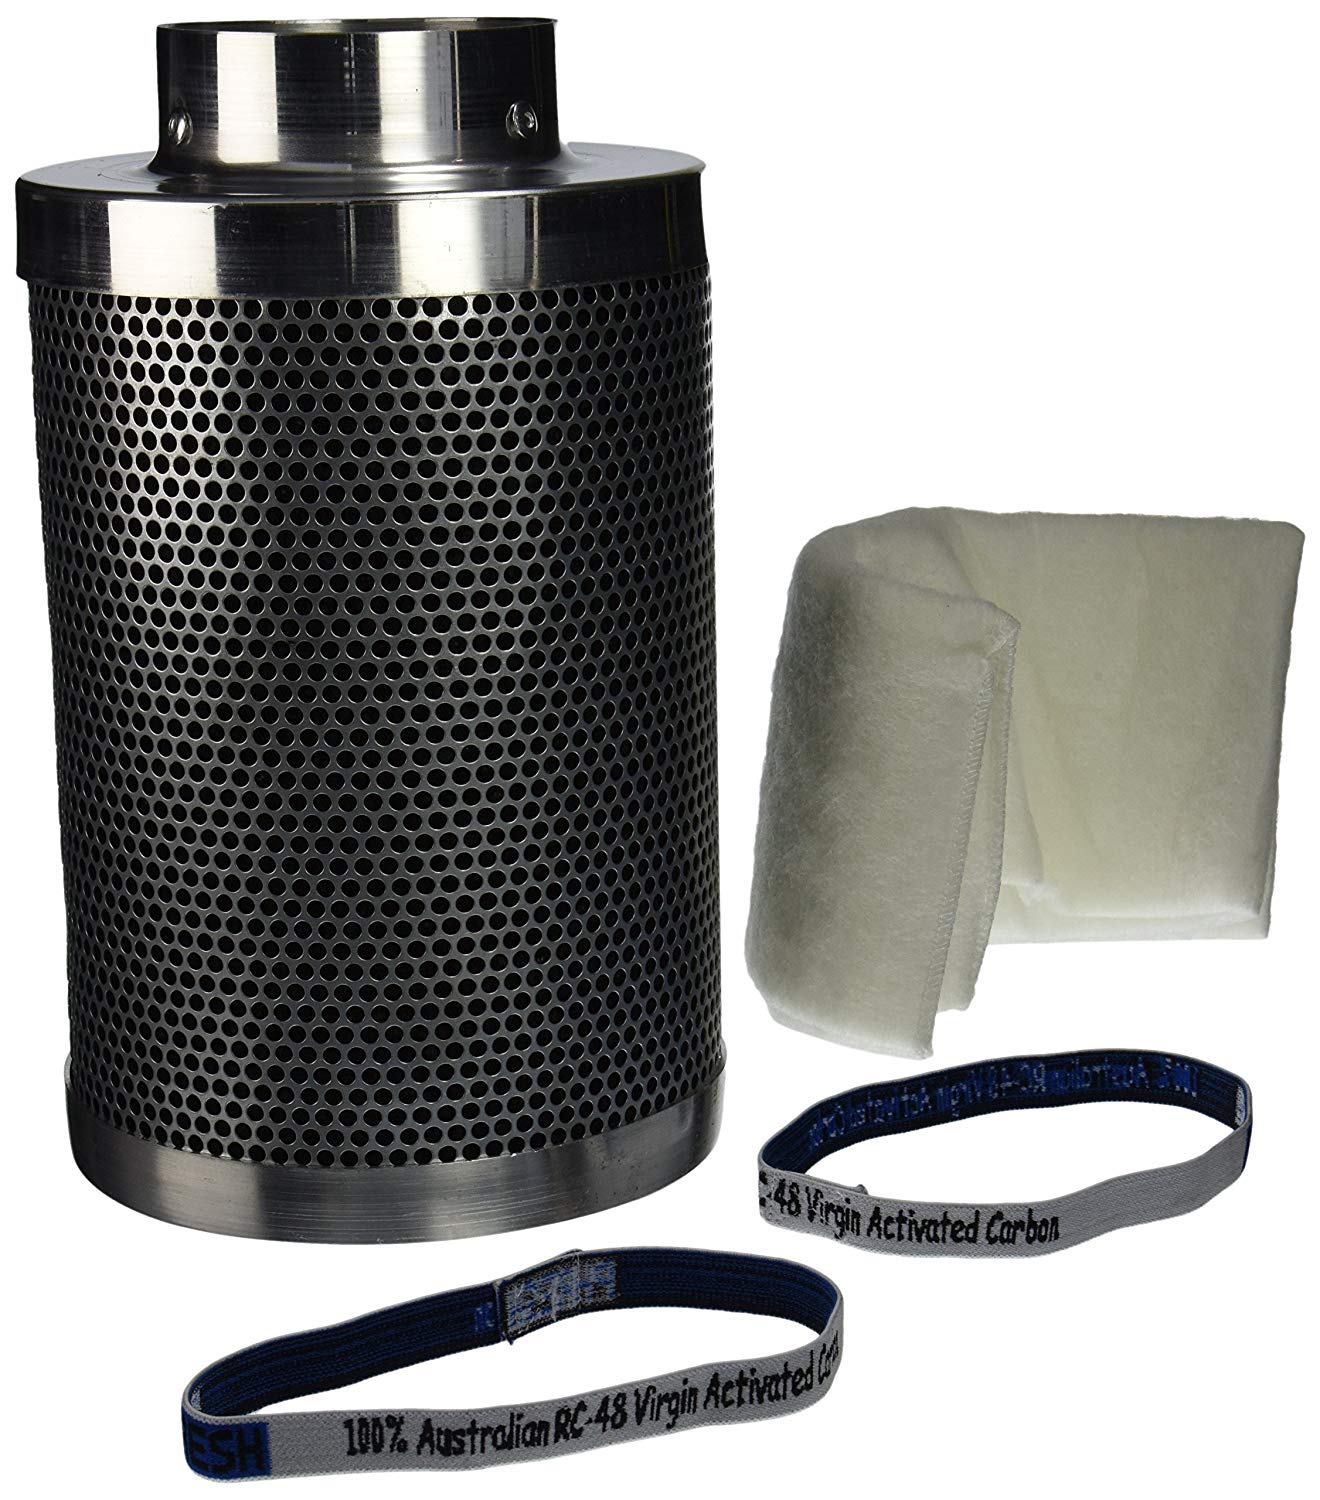 activated carbon filters for water